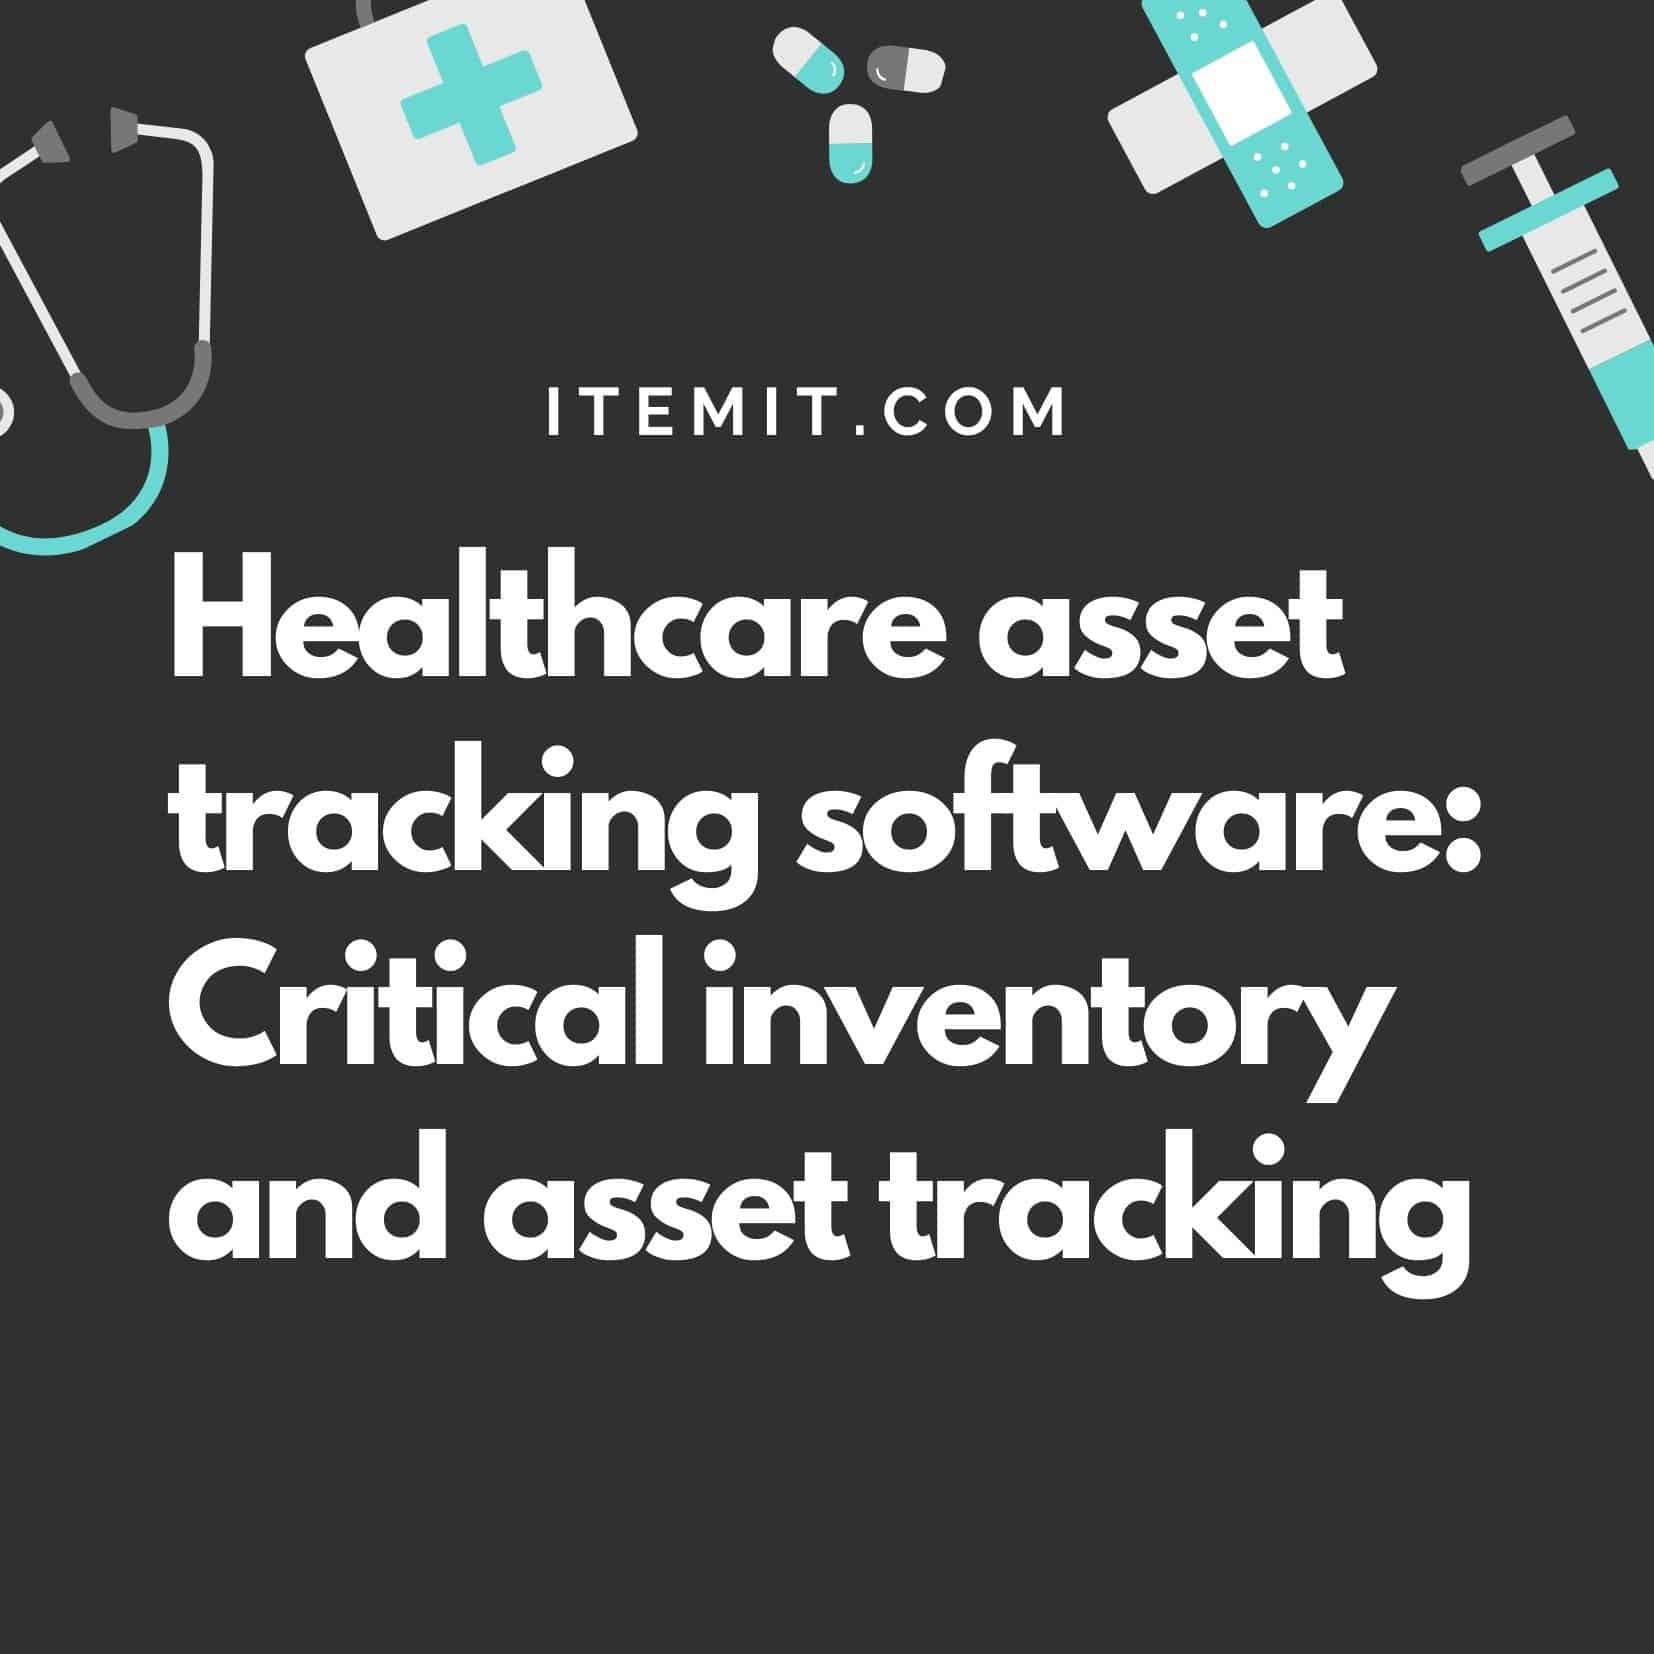 Healthcare asset tracking software Critical inventory and asset tracking